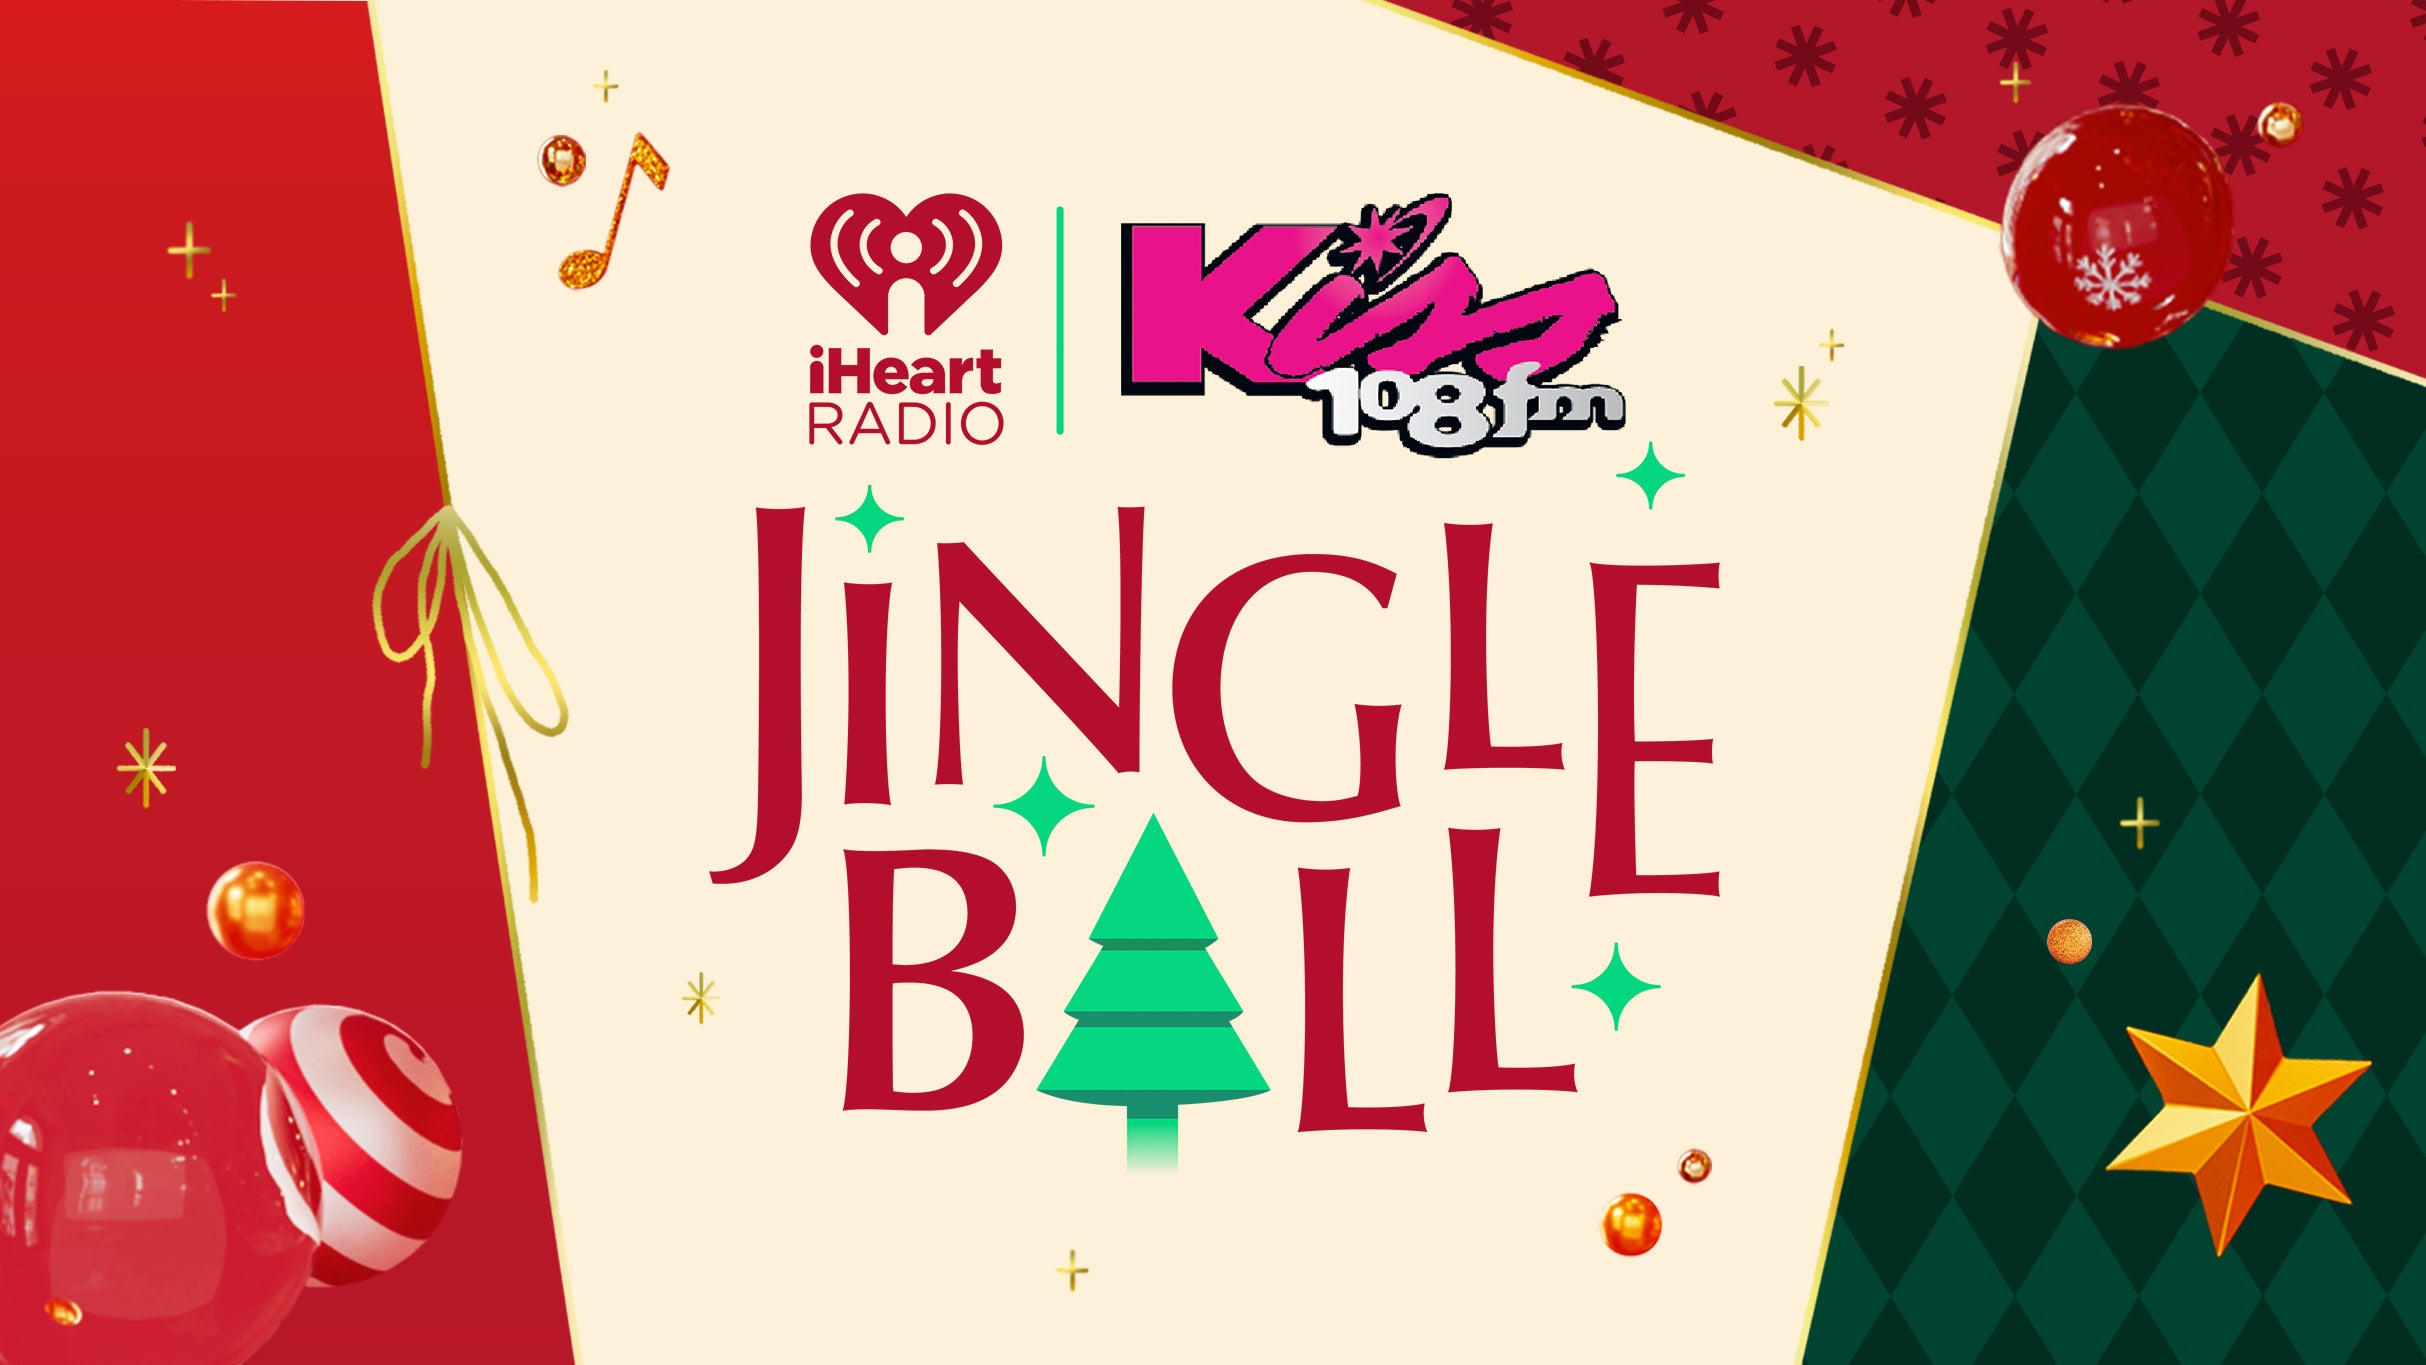 Kiss 108s Jingle Ball Presented By Capital One in Boston promo photo for KISS 108 VIP On-Sale presale offer code